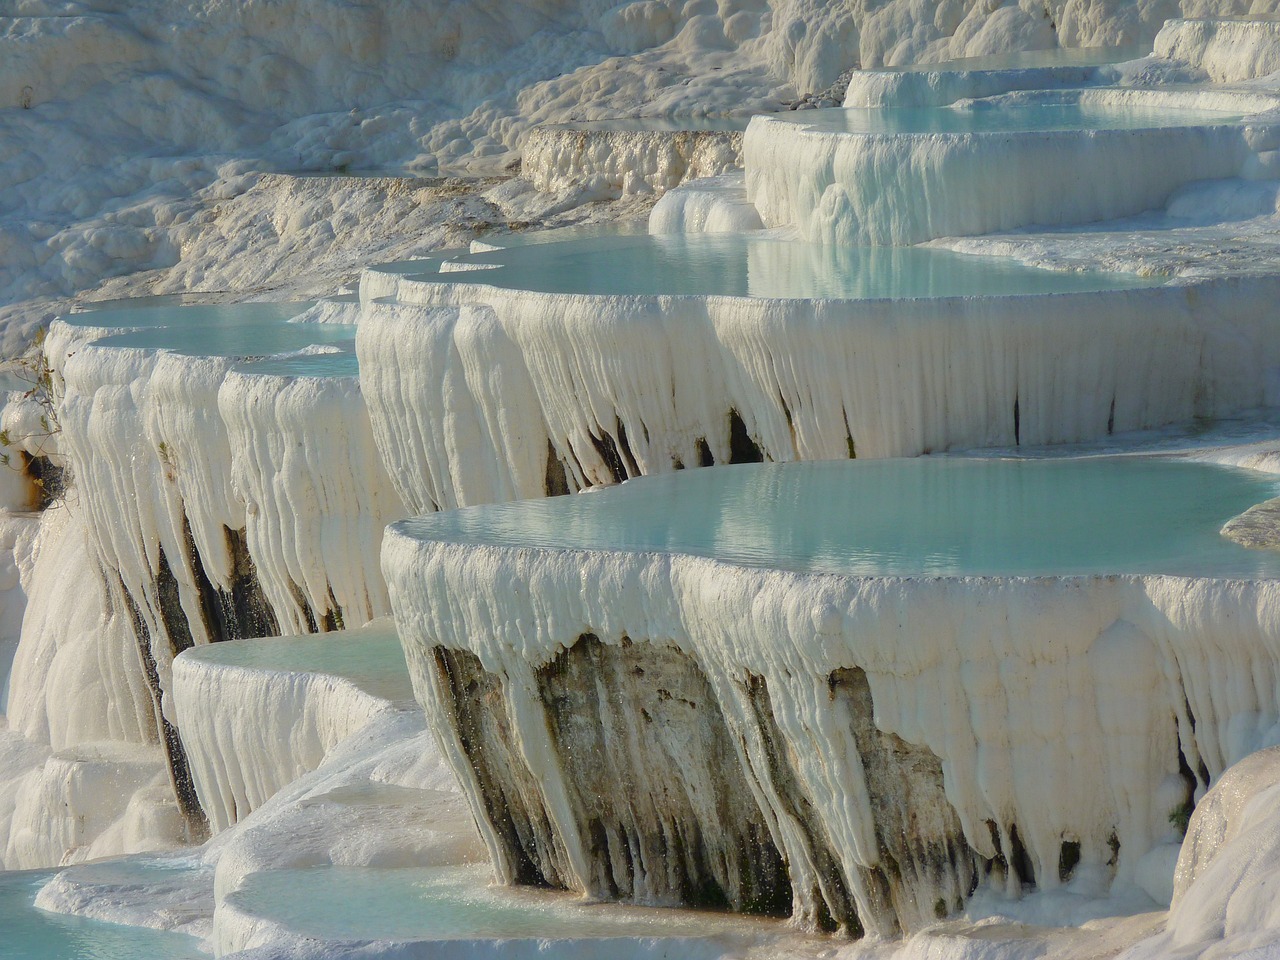 Tranquil Pamukkale: Hot Springs and Ancient Wonders